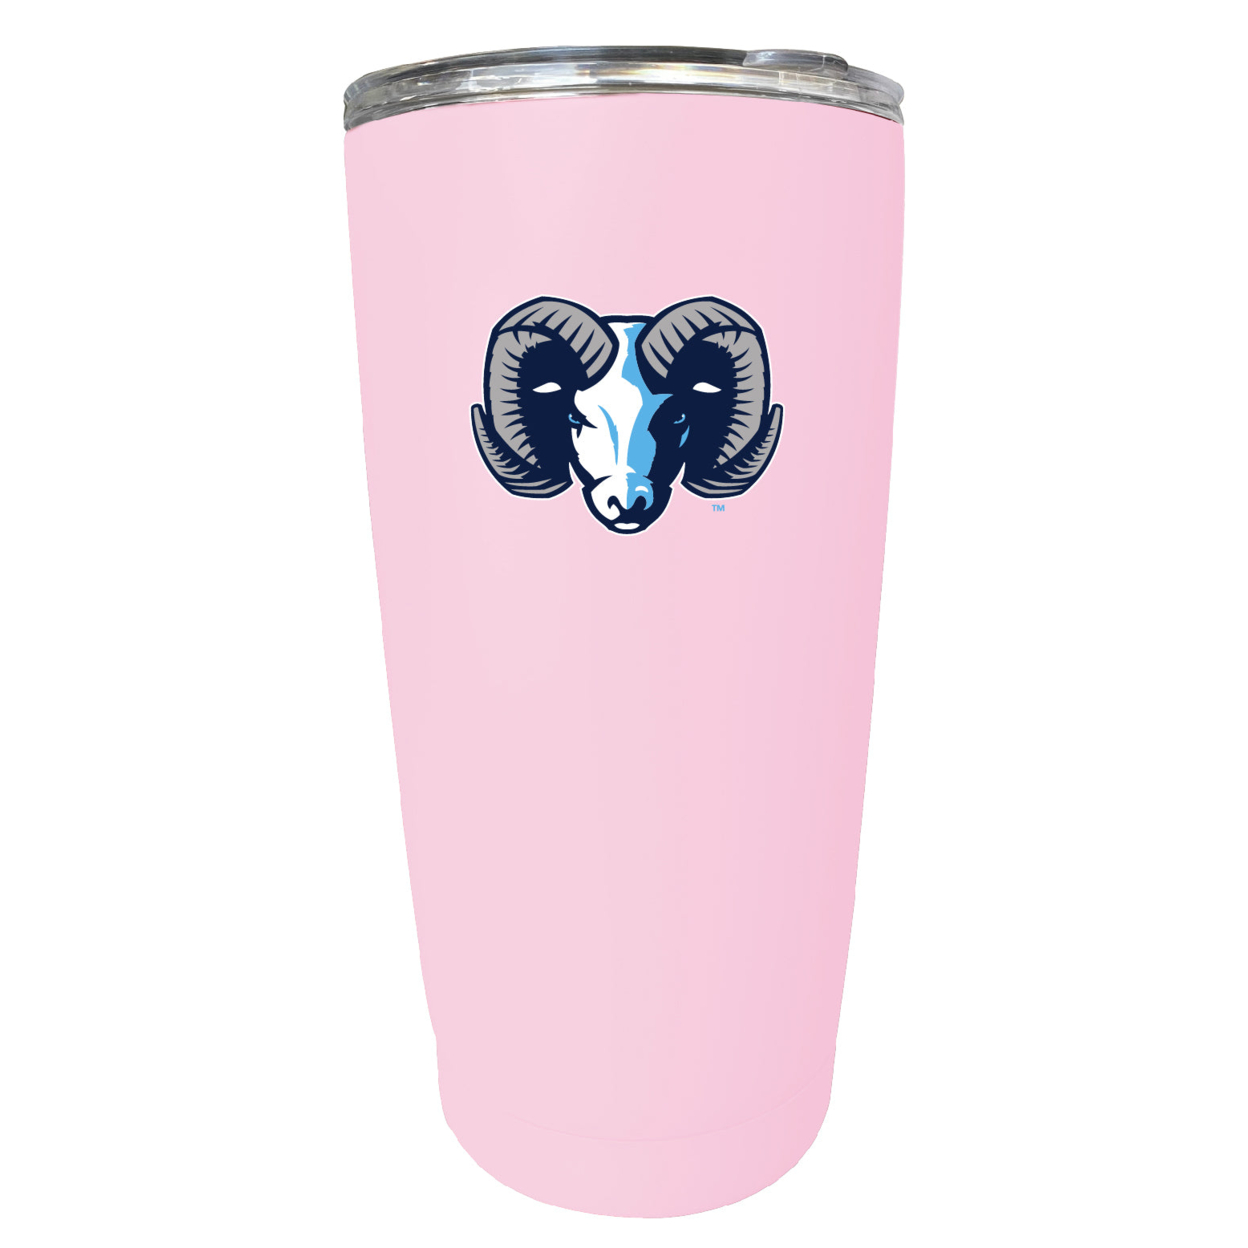 Rhode Island University 16 Oz Stainless Steel Insulated Tumbler - Pink